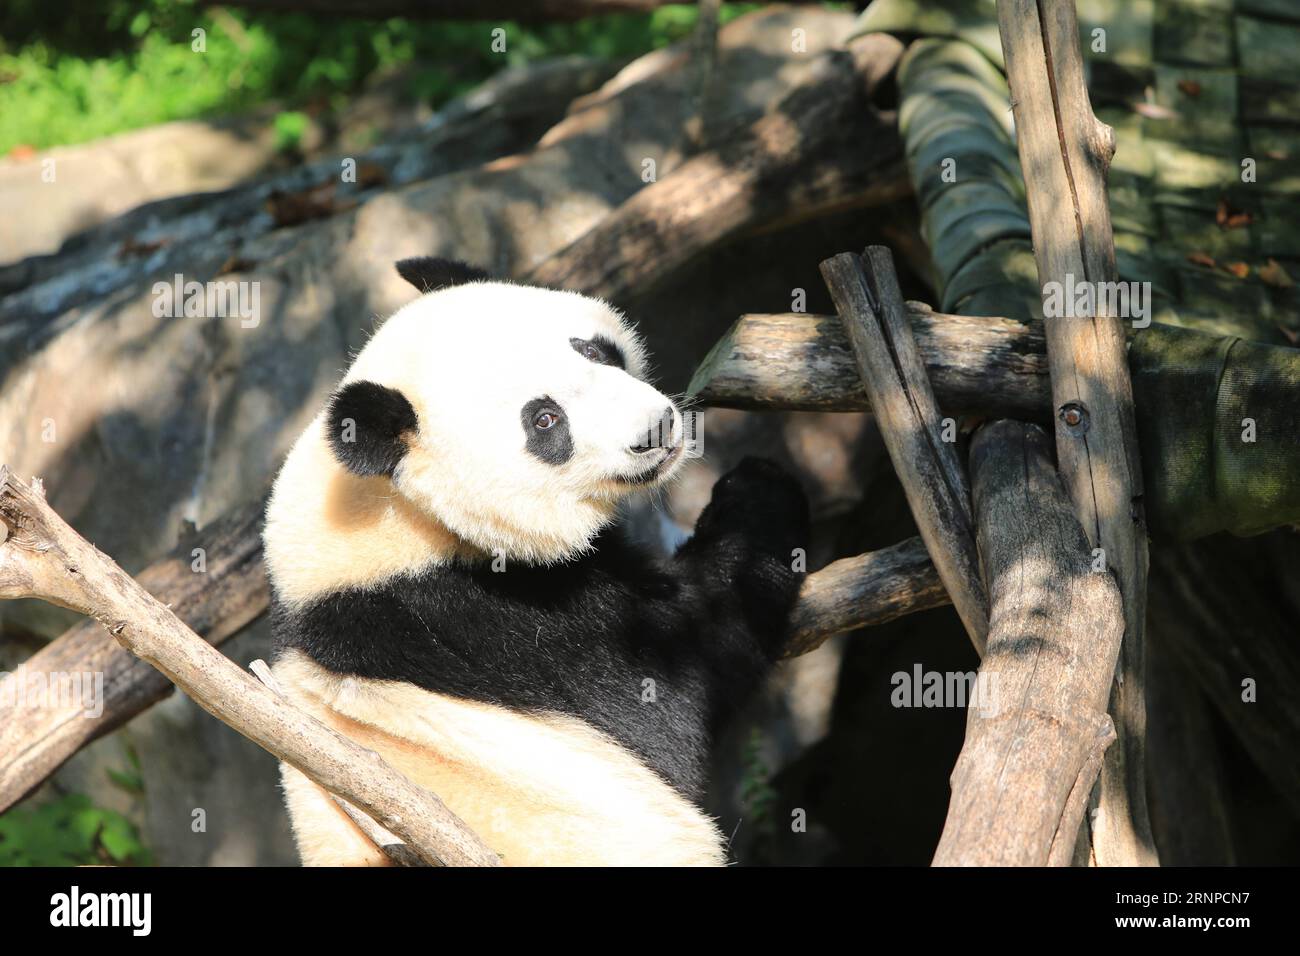 (170822) -- WASHINGTON, Aug. 22, 2017 -- Giant panda Beibei is seen during its birthday celebration at Smithsonian s National Zoo in Washington D.C., the United States, Aug. 22, 2017. The zoo on Tuesday held a celebration for giant panda Beibei s two-year-old birthday, which attracted lots of visitors. ) U.S.-WASHINGTON D.C.-GIANT PANDA-BIRTHDAY CELEBRATION YangxChenglin PUBLICATIONxNOTxINxCHN   Washington Aug 22 2017 Giant Panda Beibei IS Lakes during its Birthday Celebration AT Smithsonian S National Zoo in Washington D C The United States Aug 22 2017 The Zoo ON Tuesday Hero a Celebration fo Stock Photo